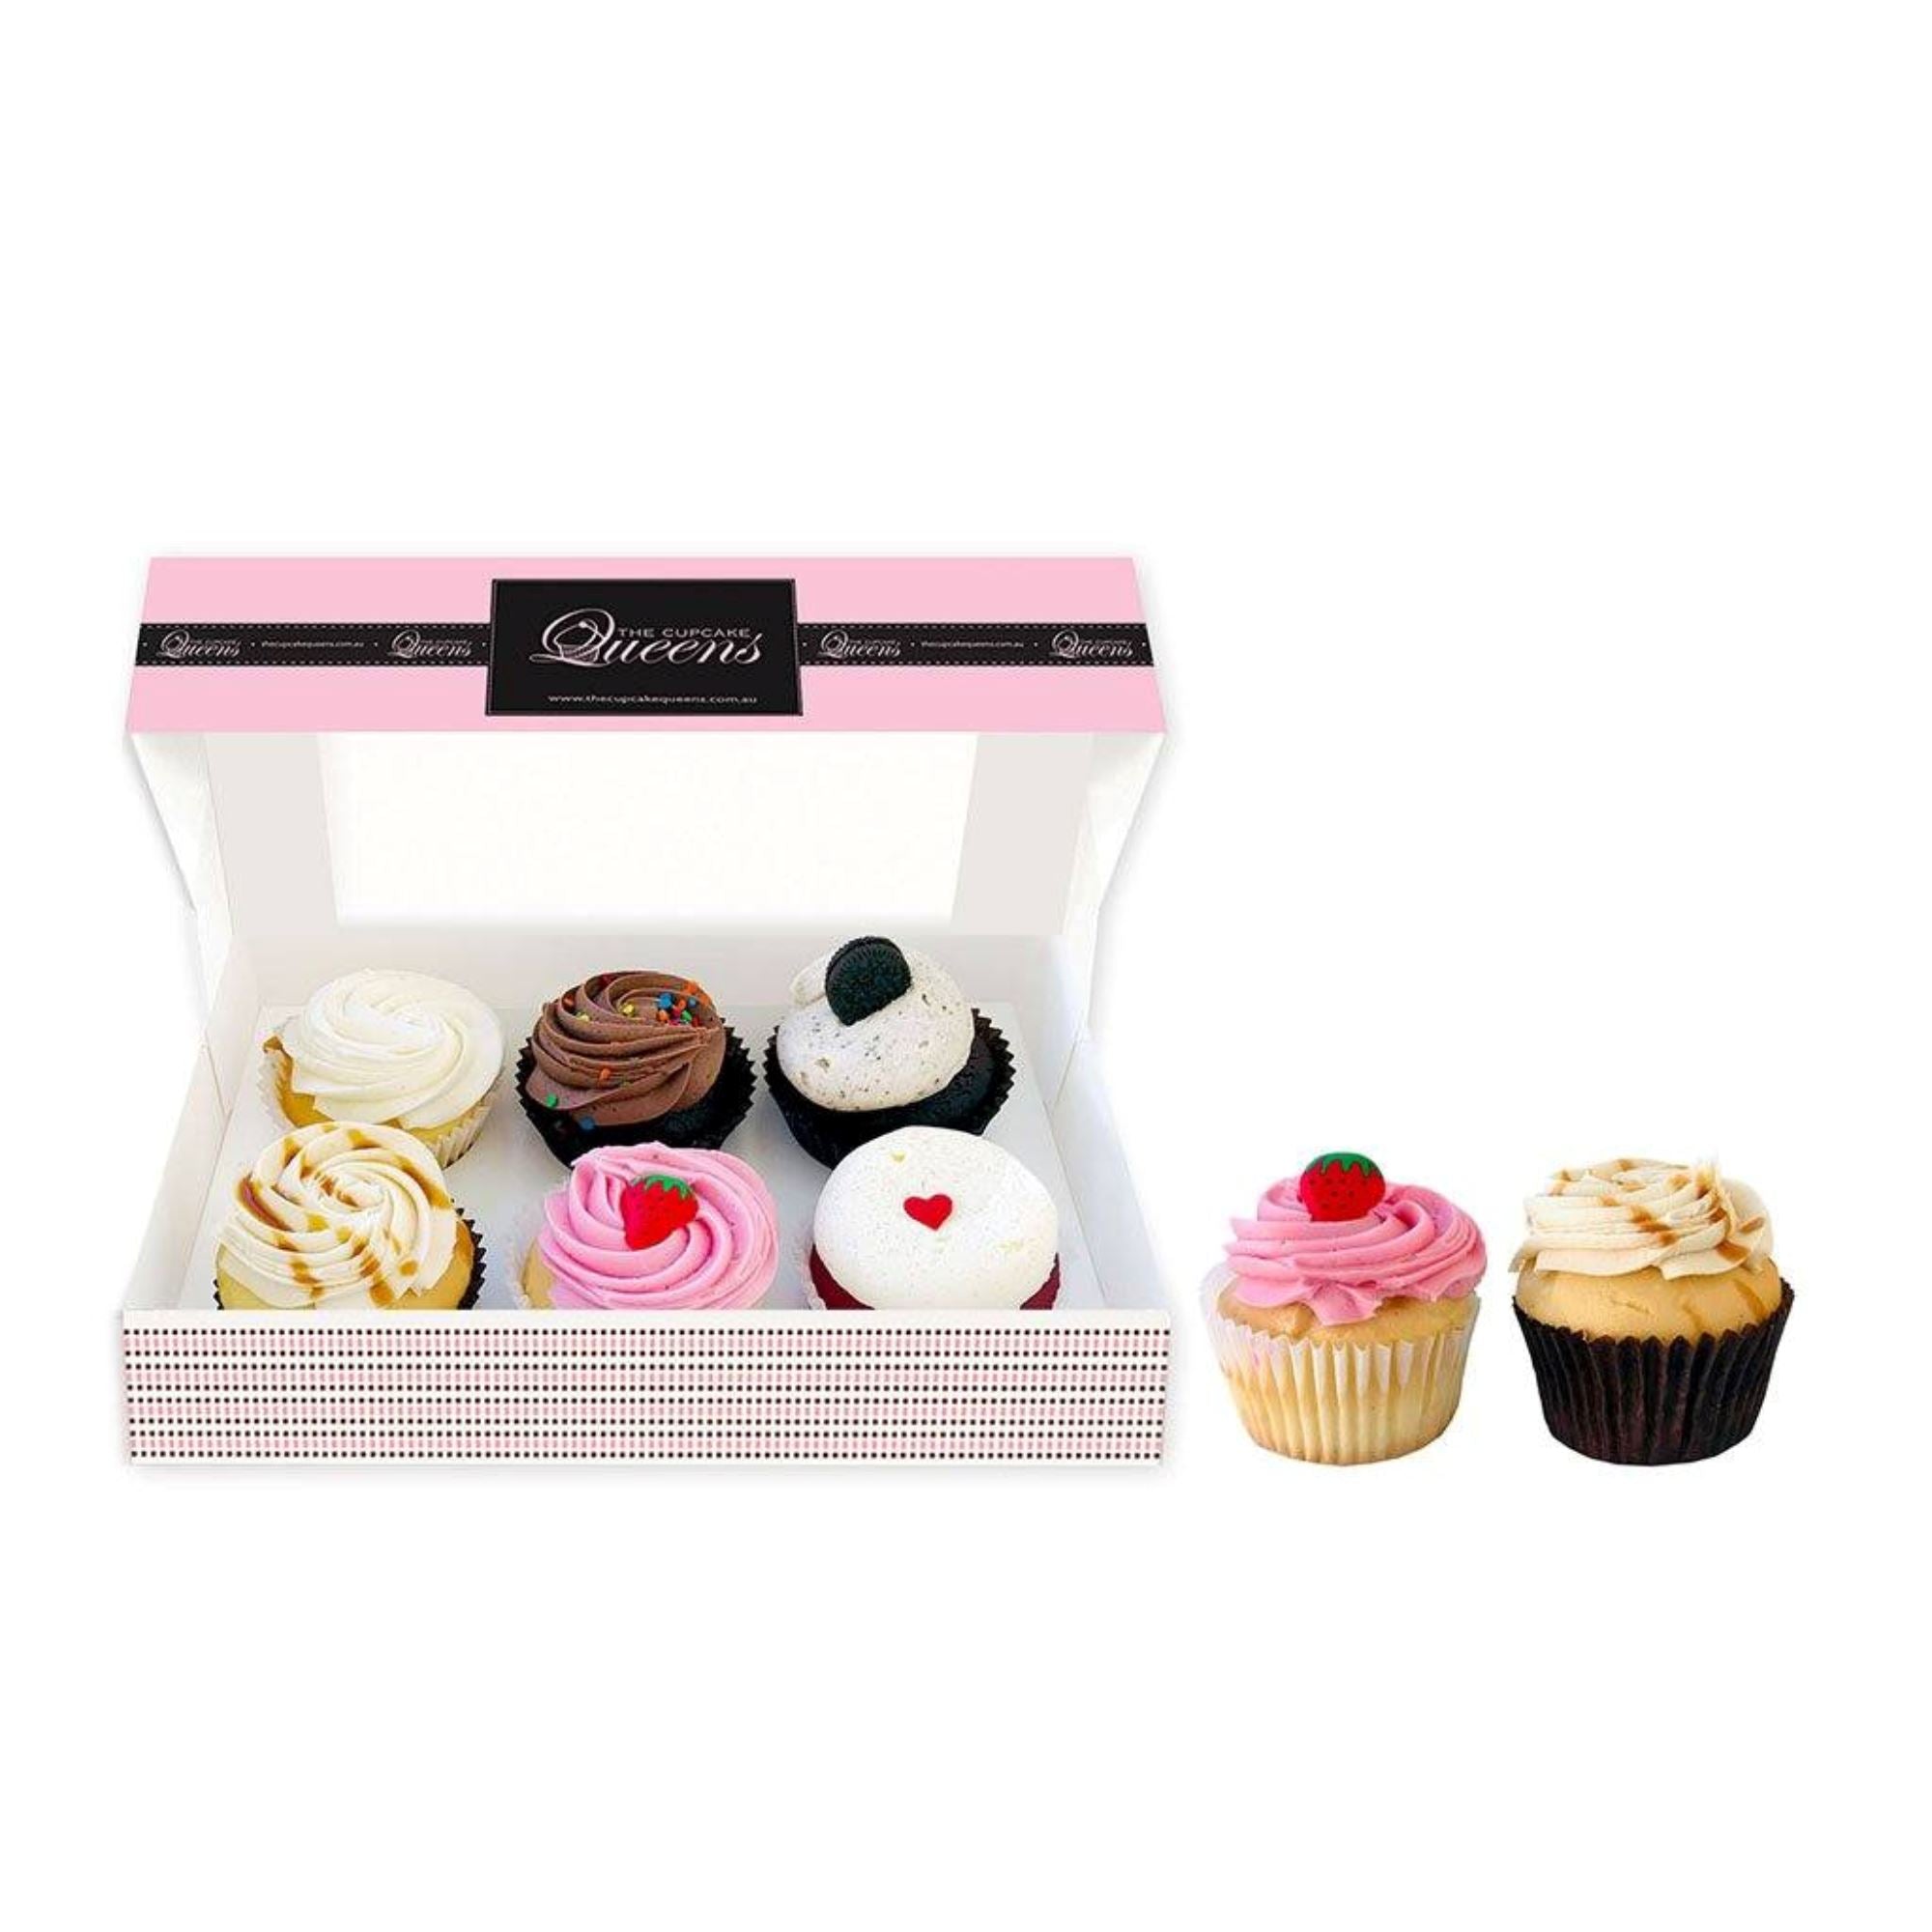 Daily Favourites Regular size 6 Pack Cupcakes The Cupcake Queens 